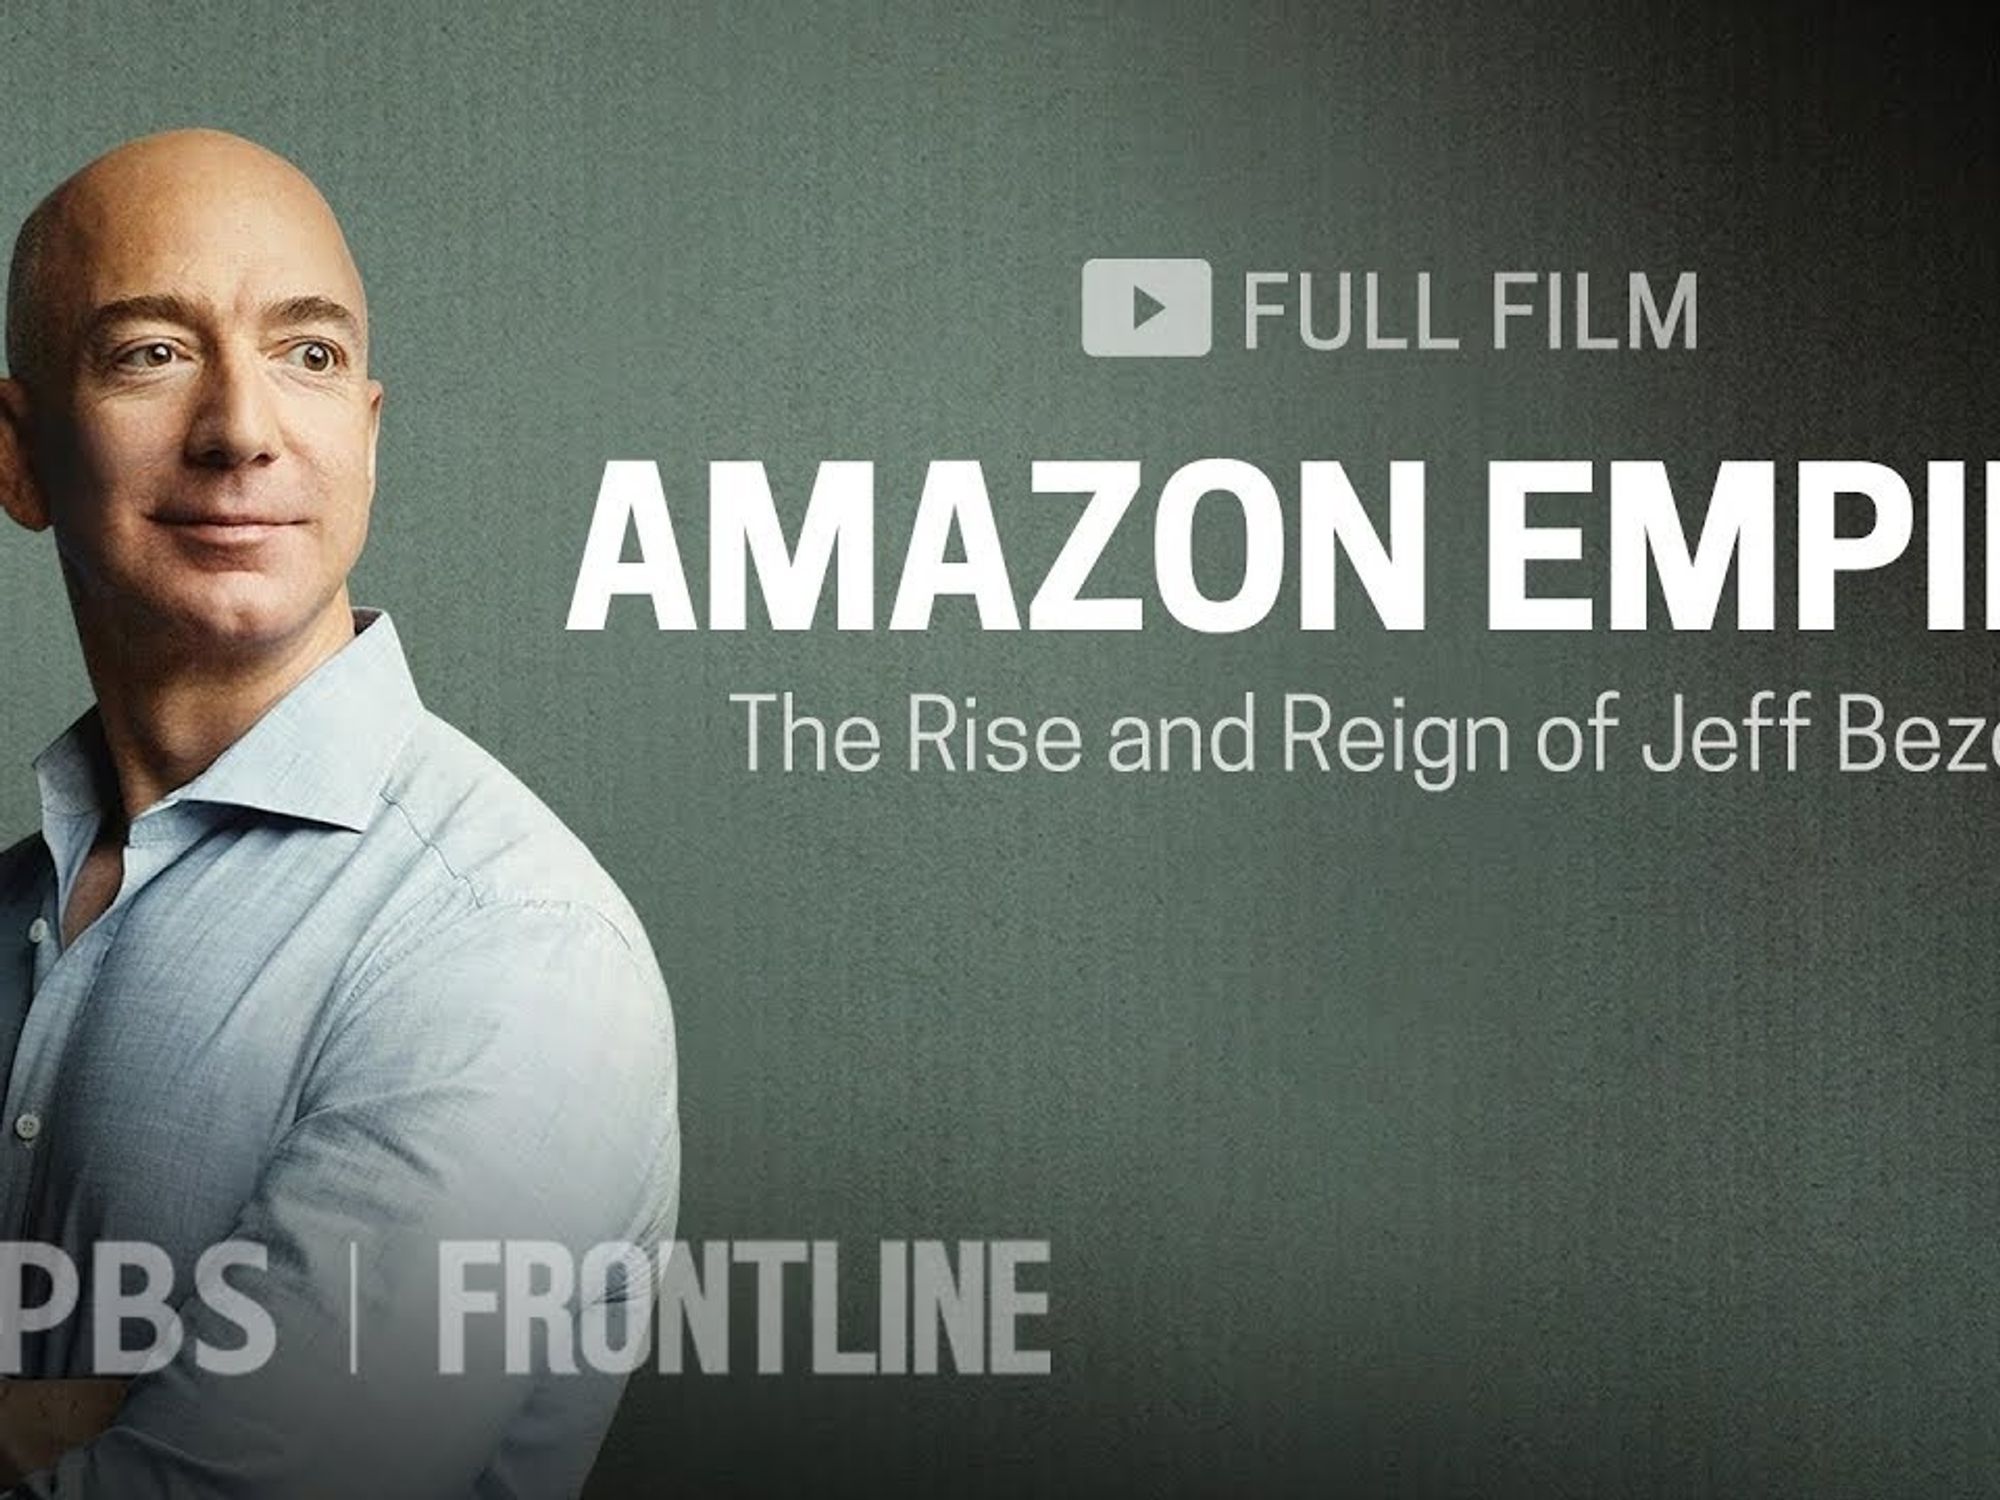 The Definitive Account of Amazon’s Ambition: Key Scenes From PBS’s Epic Investigation